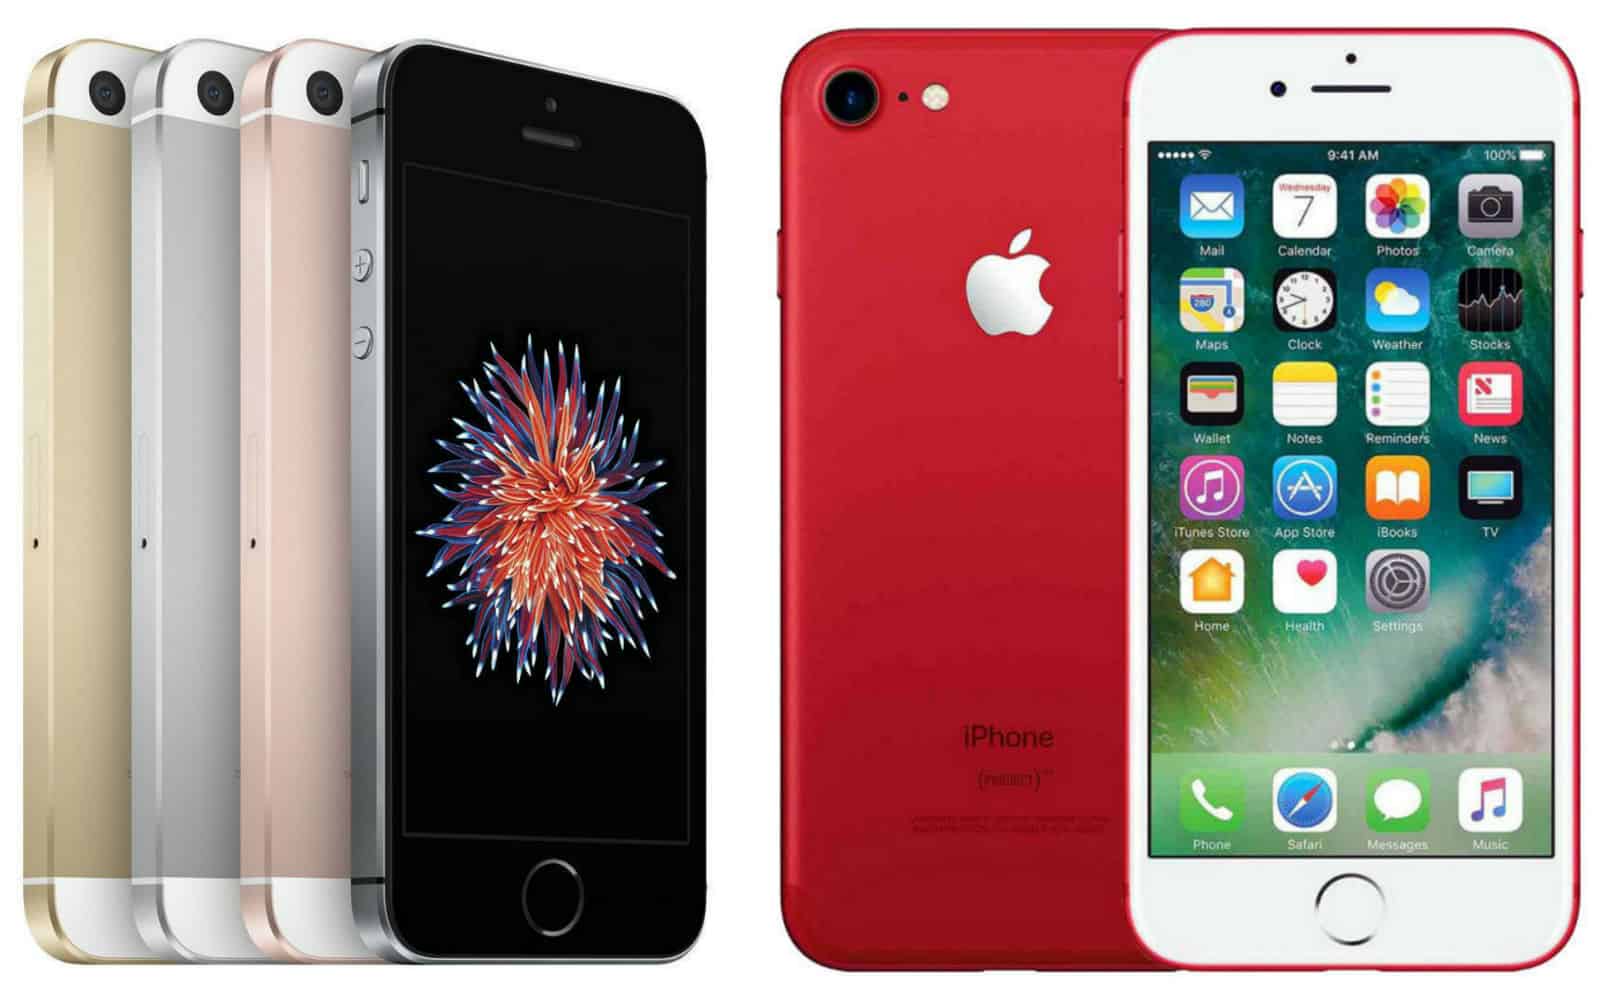 You know you want a red iPhone. And now you can save with a refurbished one! Or choose from other refurbished iPhones.